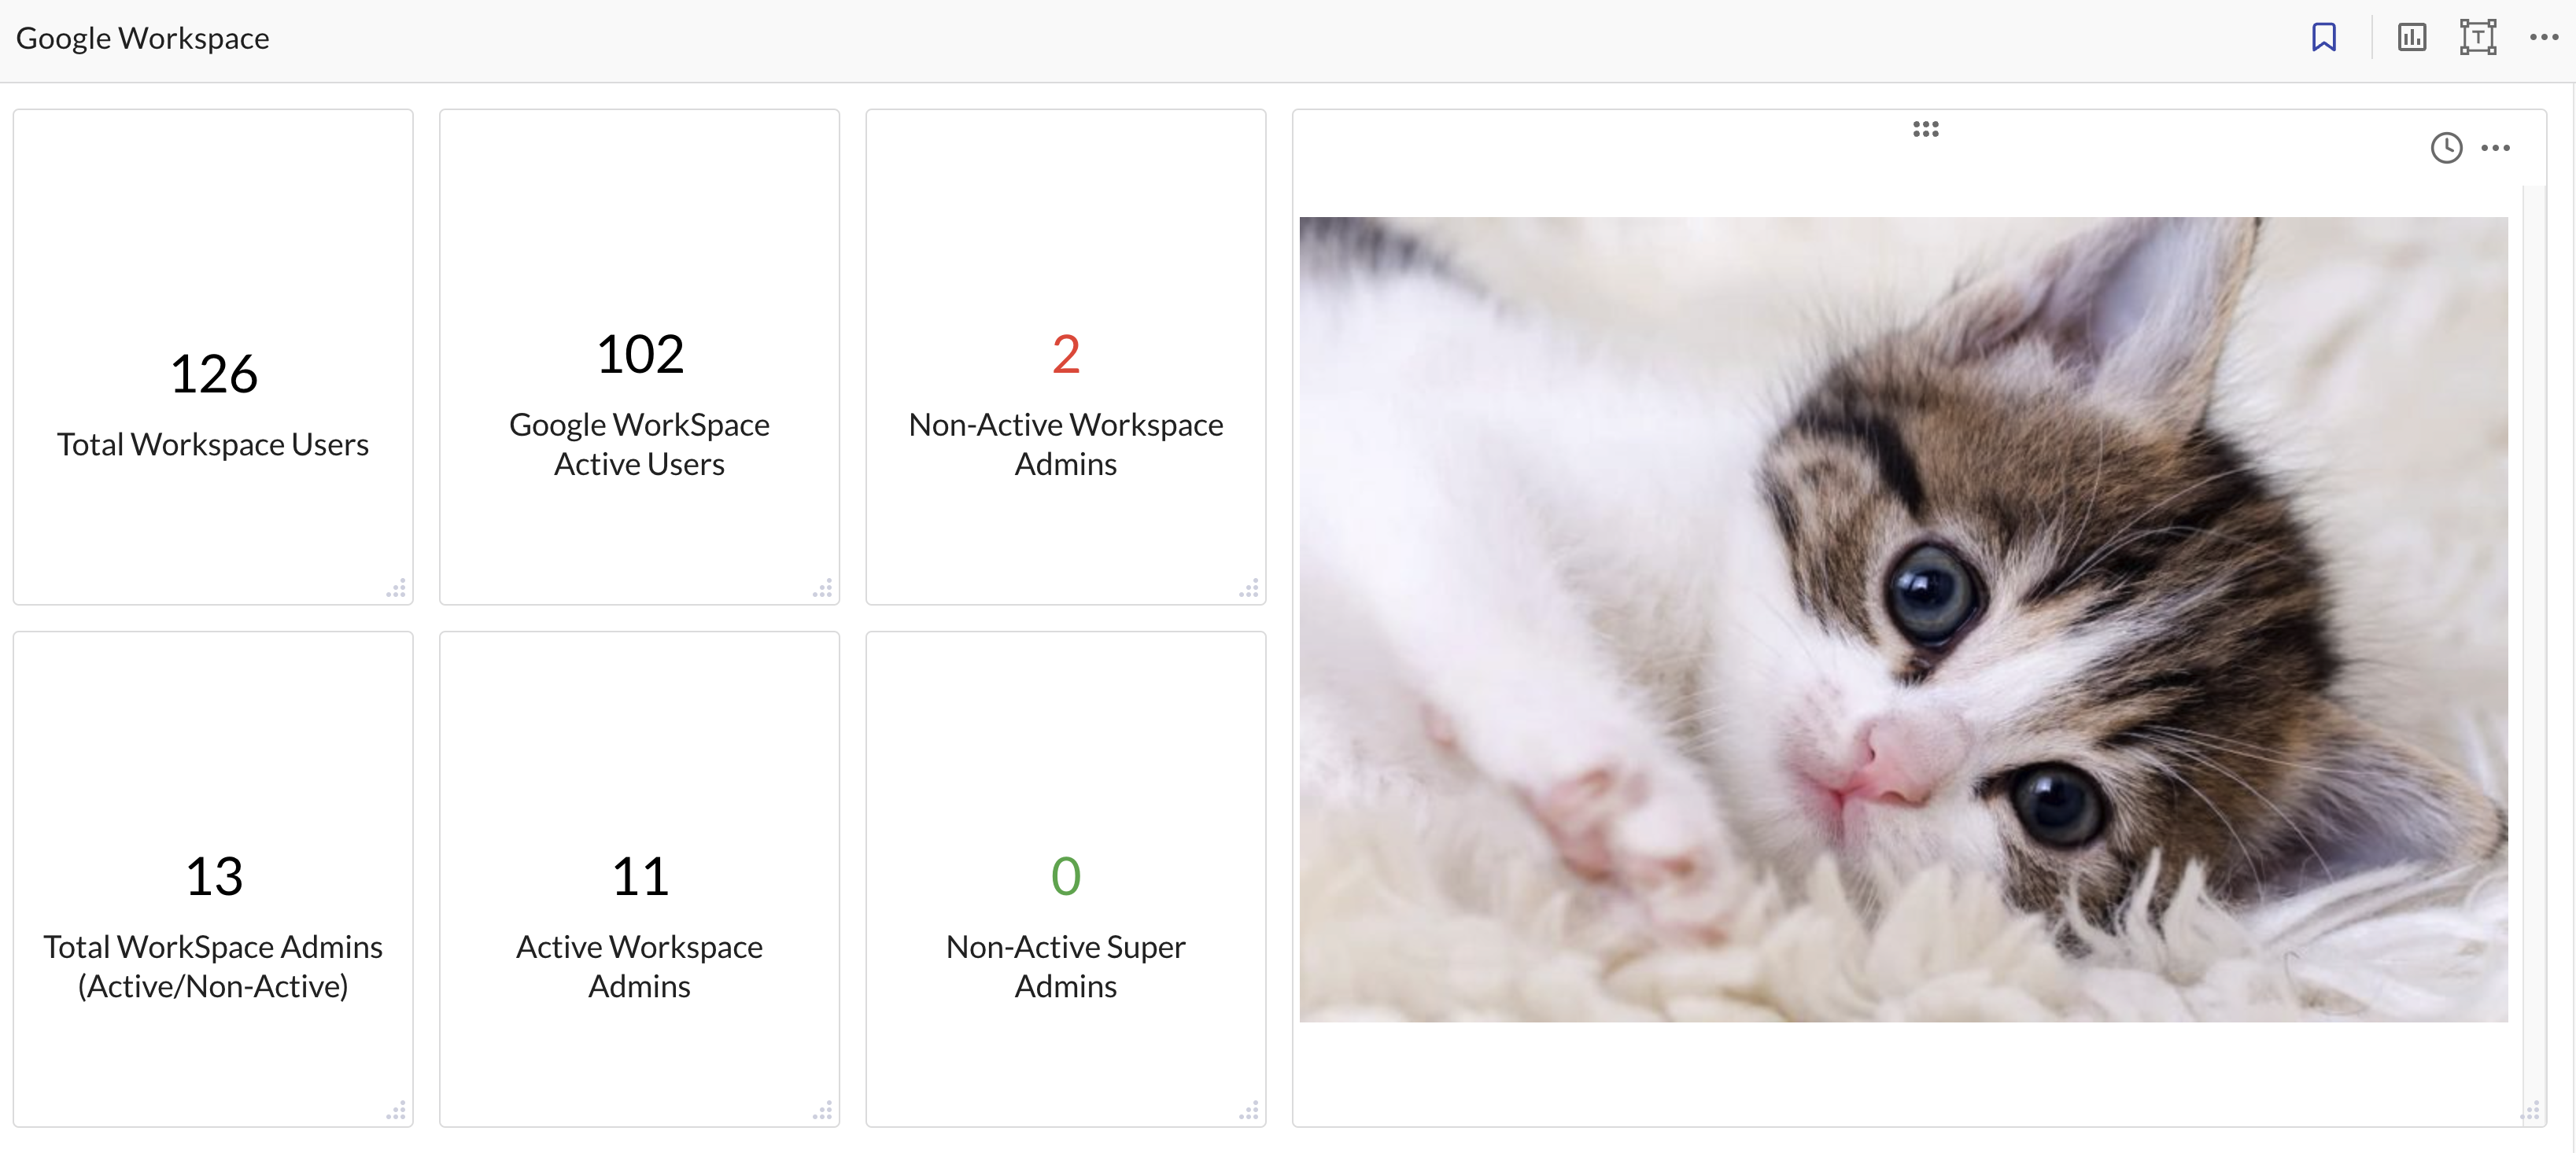 JupiterOne Insights dashboard with a markdown widget featuring an image of a cute kitten